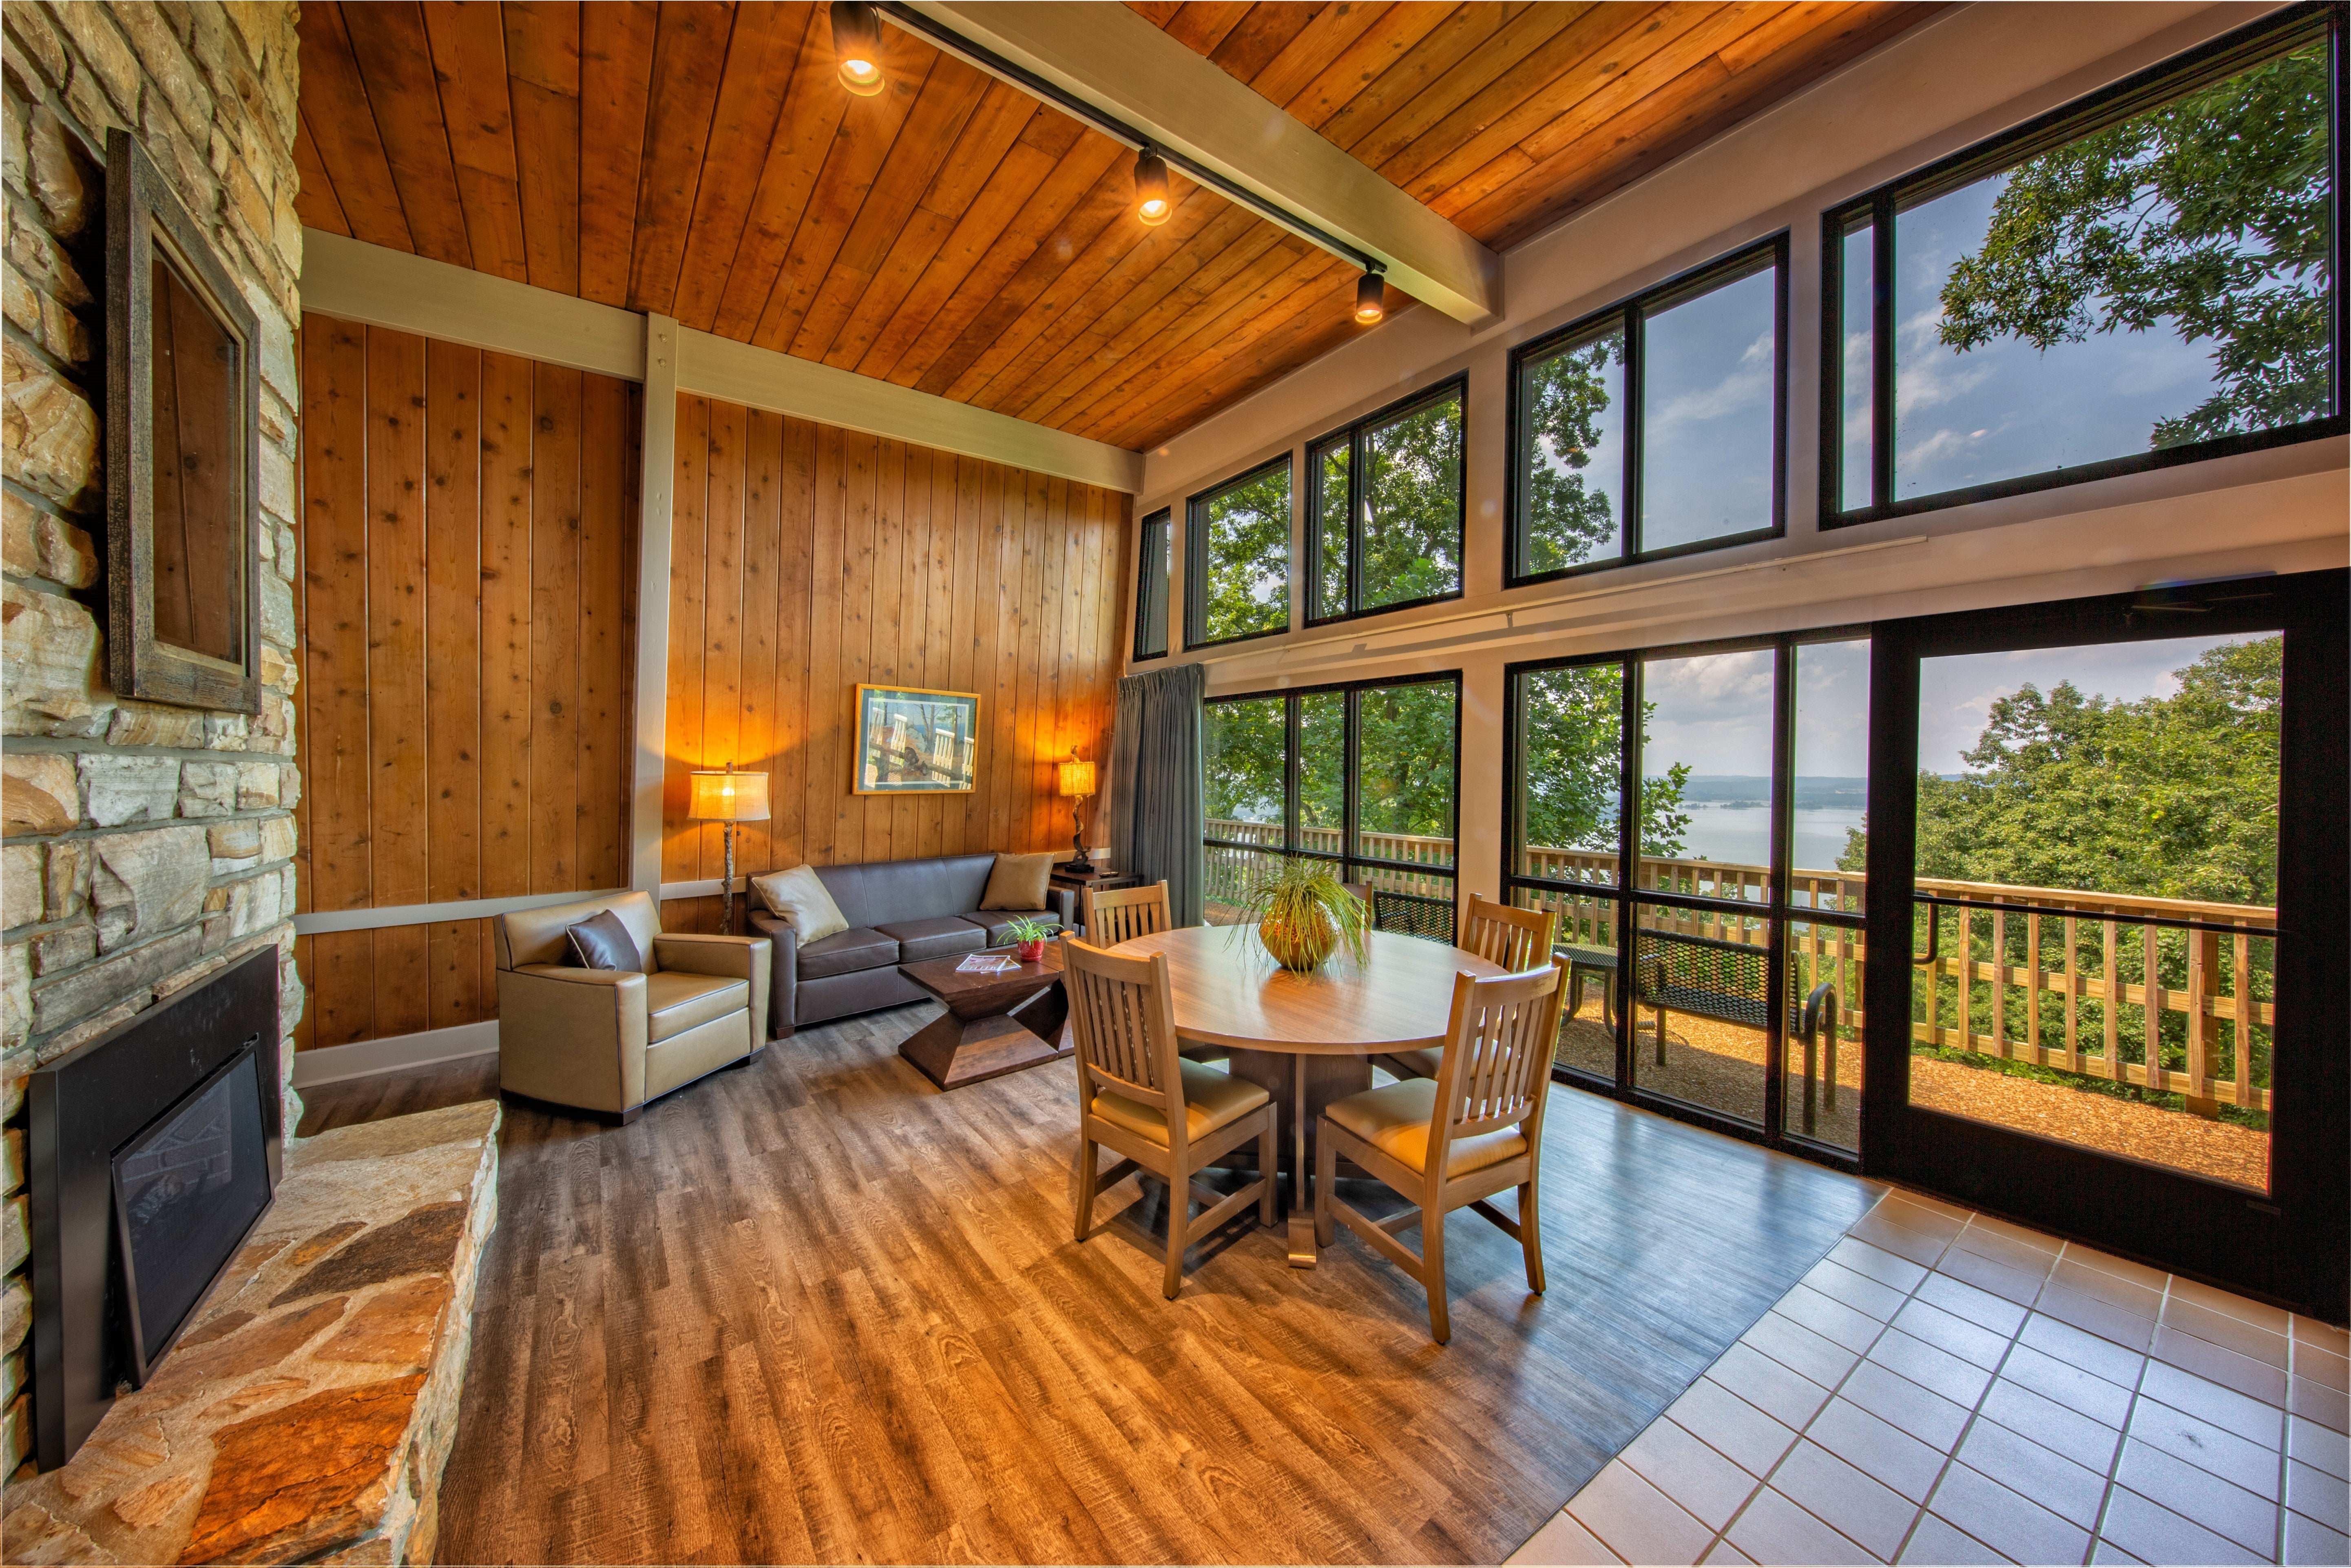 A look inside one of the renovated chalets at Lake Guntersville State Park. (Photo by Mark Munoz Photography)